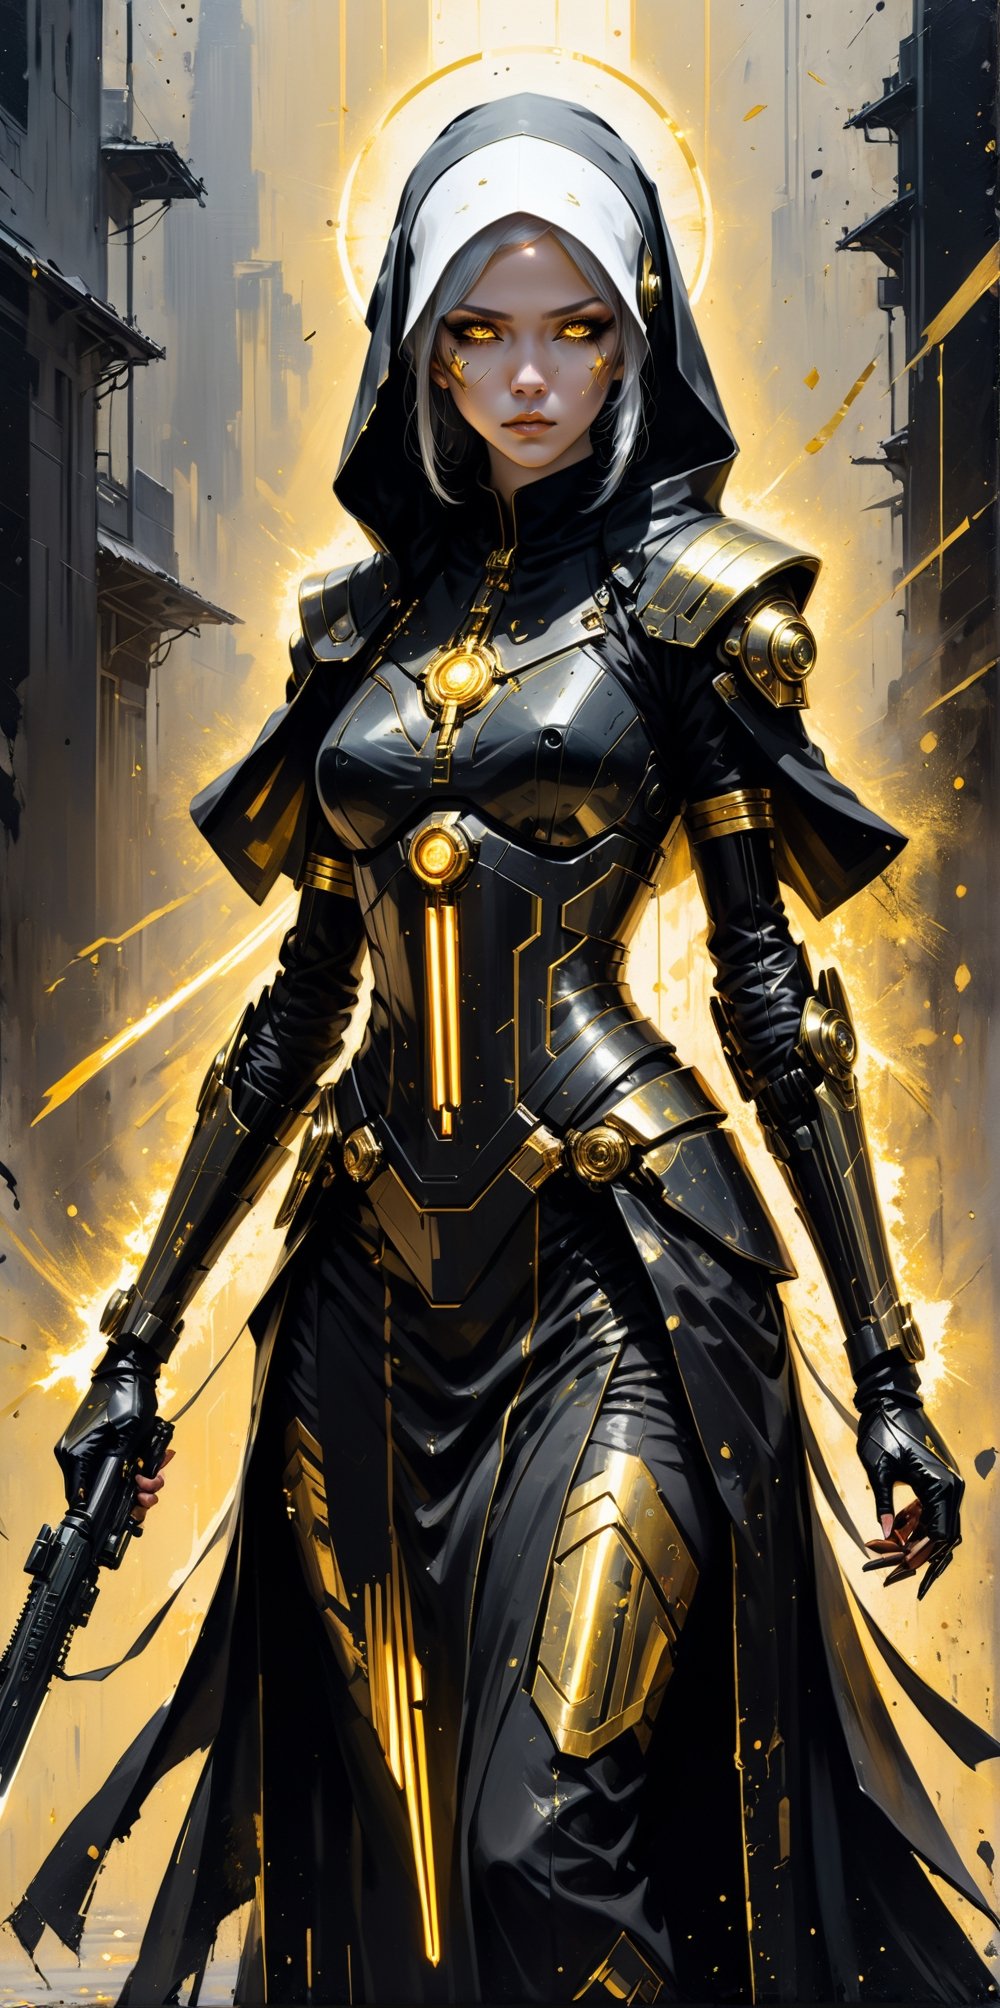 Elegant, highly detailed painting capturing a cyborg nun in the act of a deadly stance, futuristic weapon in hand, eyes emitting a luminous glow, body adorned with gold and black stripes, manga-inspired aesthetic mixed with low poly minimalism, oil splatter technique enhancing the visceral feel, prominent canvas texture, backdrop of an urban portrait rendered on seemingly cracked paper, harsh brushstrokes convey movement, digital techniques imitate traditional craft art, digital painting, heavy, ultra-fine ink, manga style,art by sargent